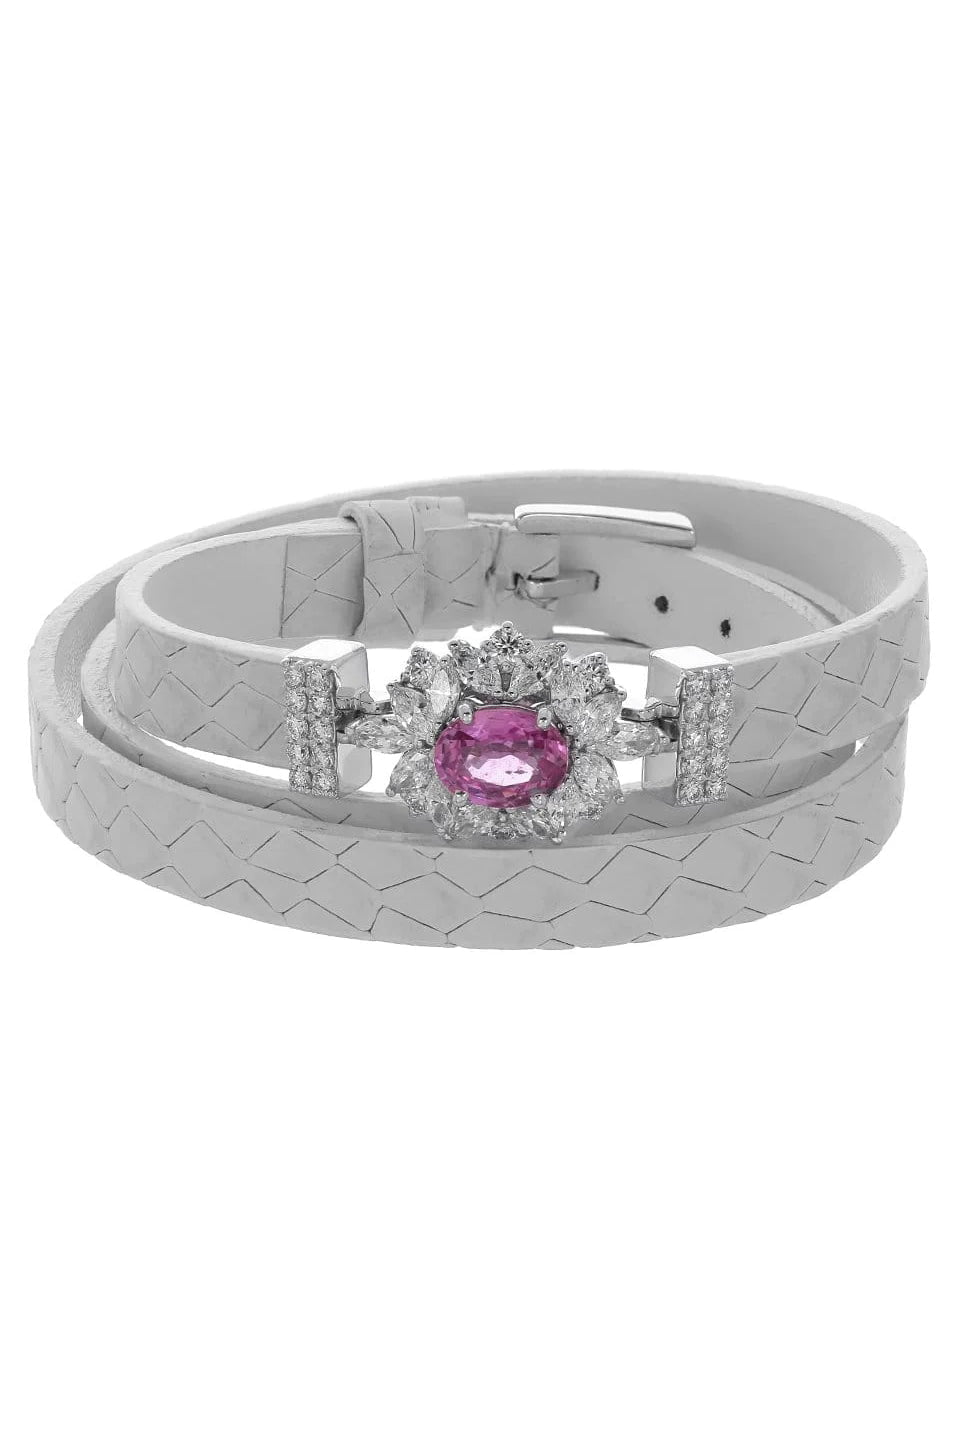 YEPREM JEWELLERY-Pink Sapphire Stamped White Leather Wrap Bracelet-WHITE GOLD